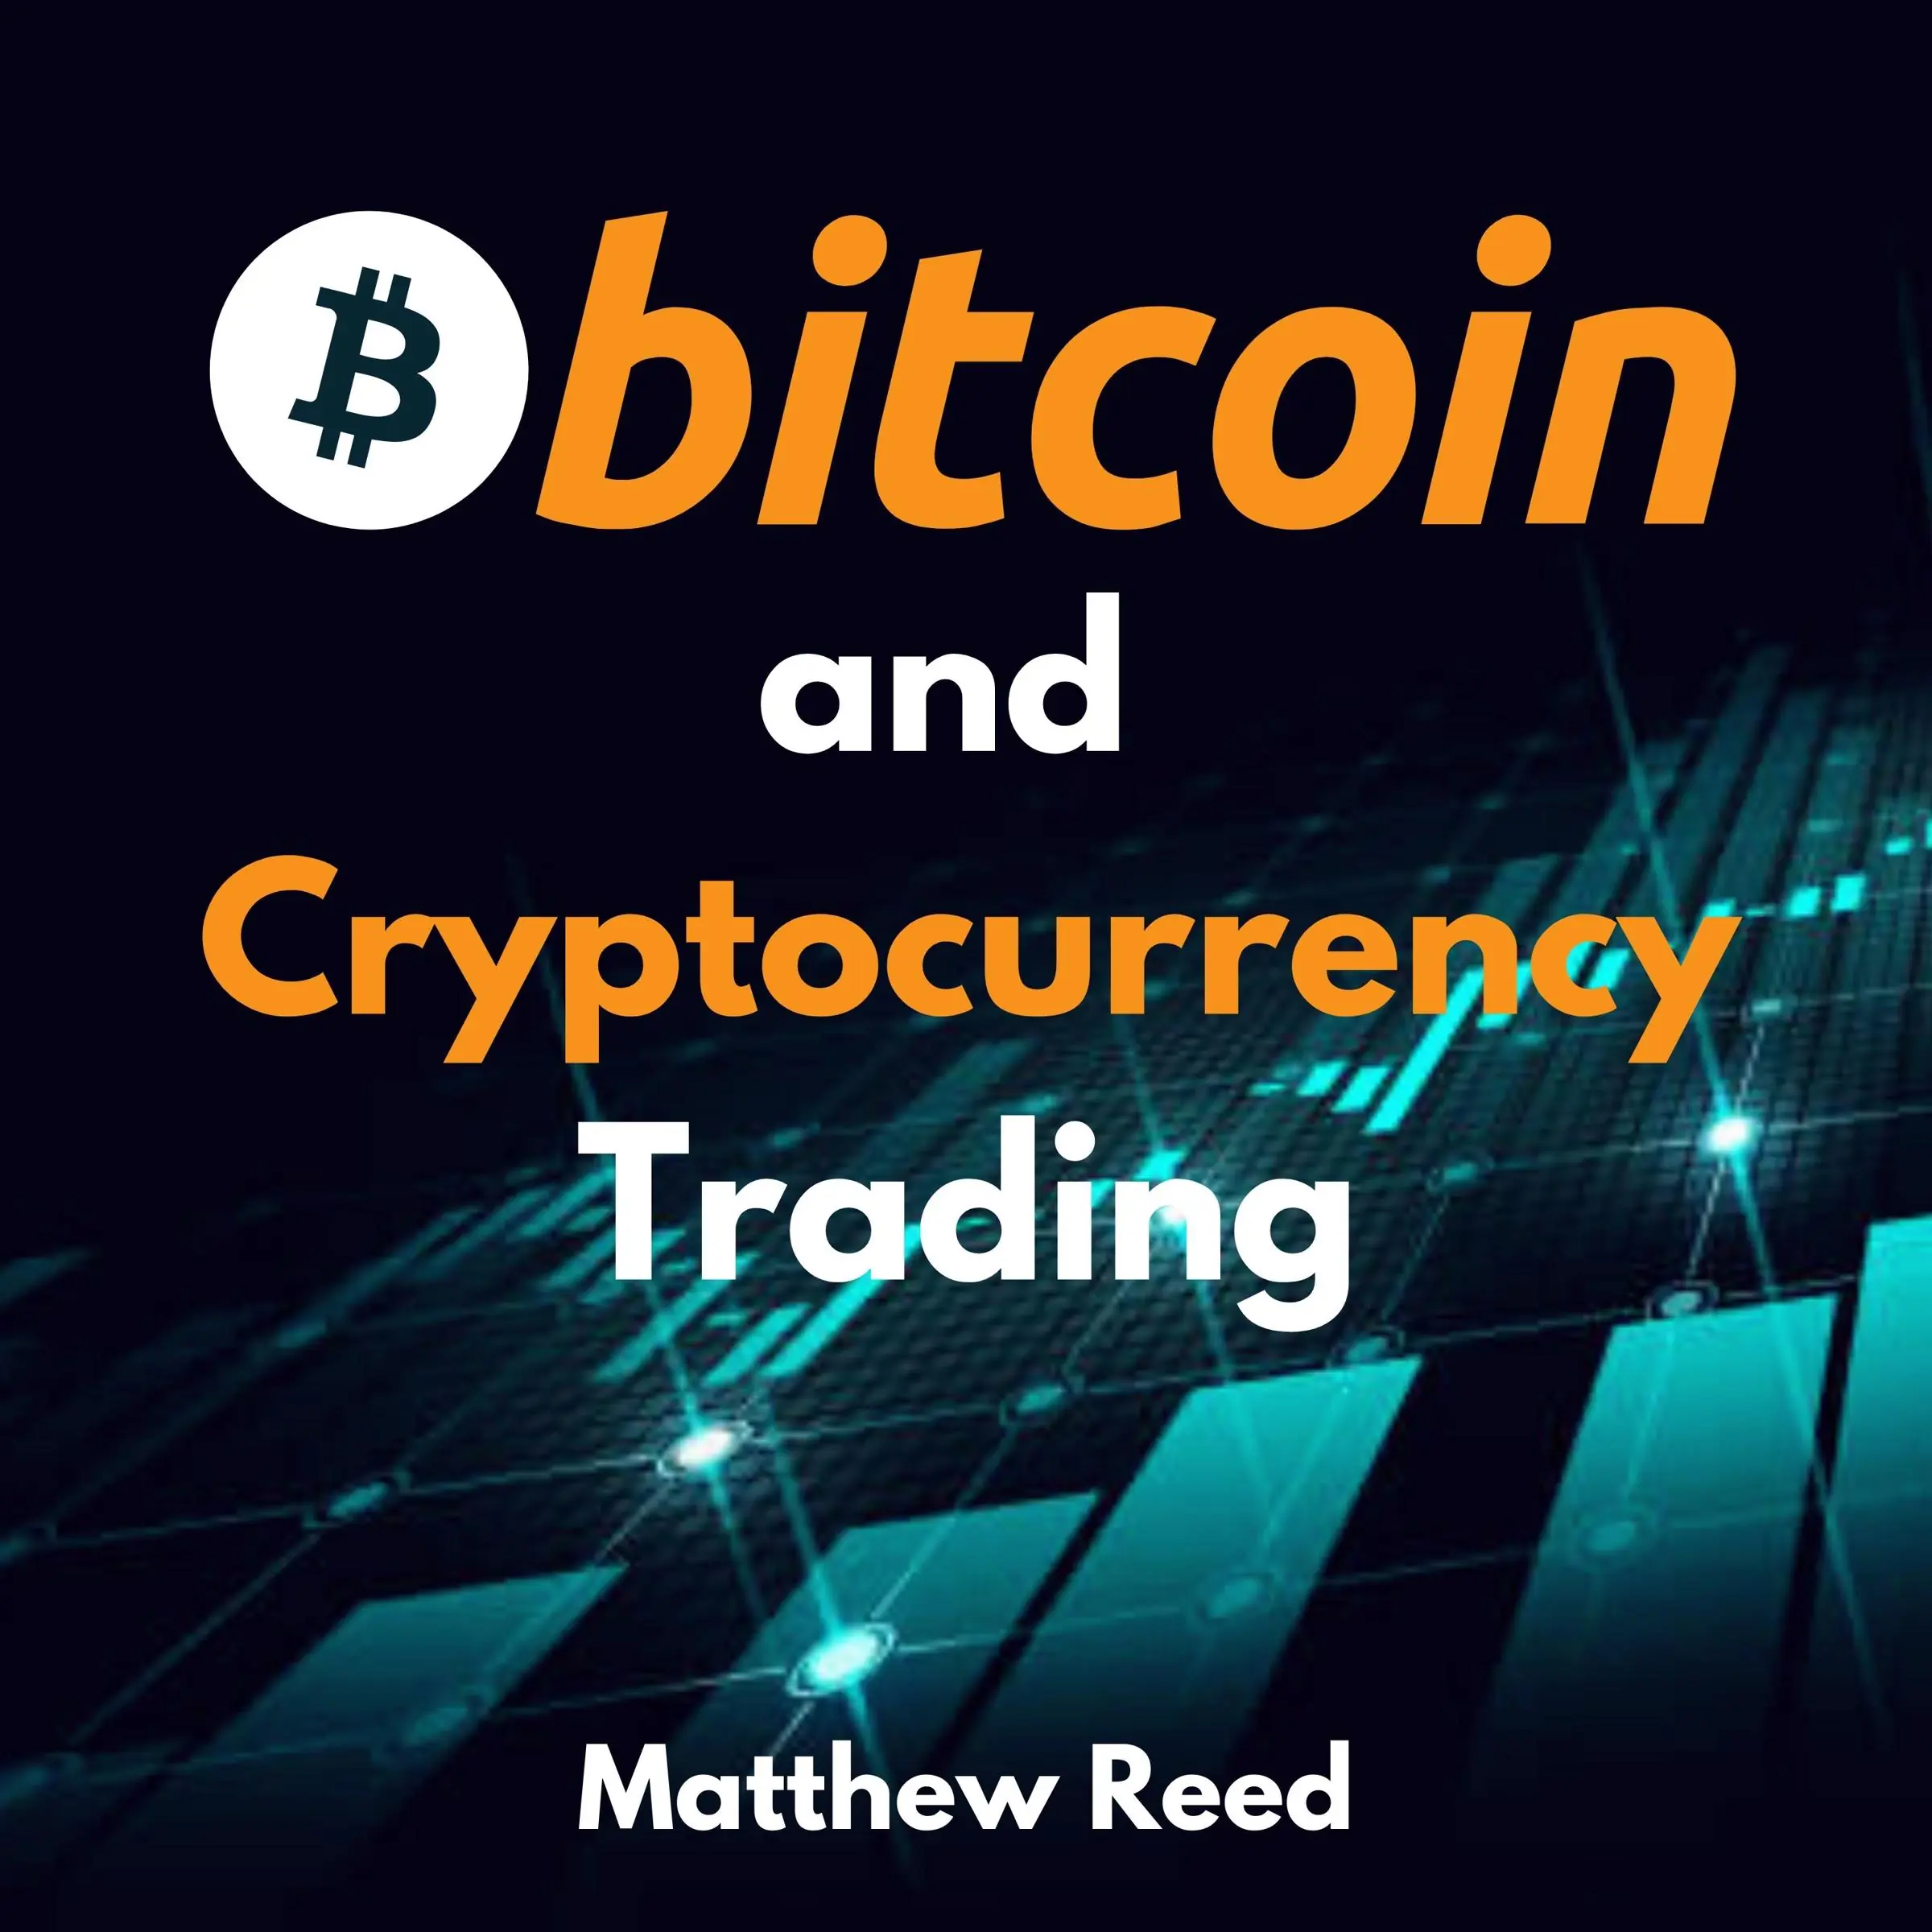 Bitcoin and Cryptocurrency Trading by Matthew Reed Audiobook